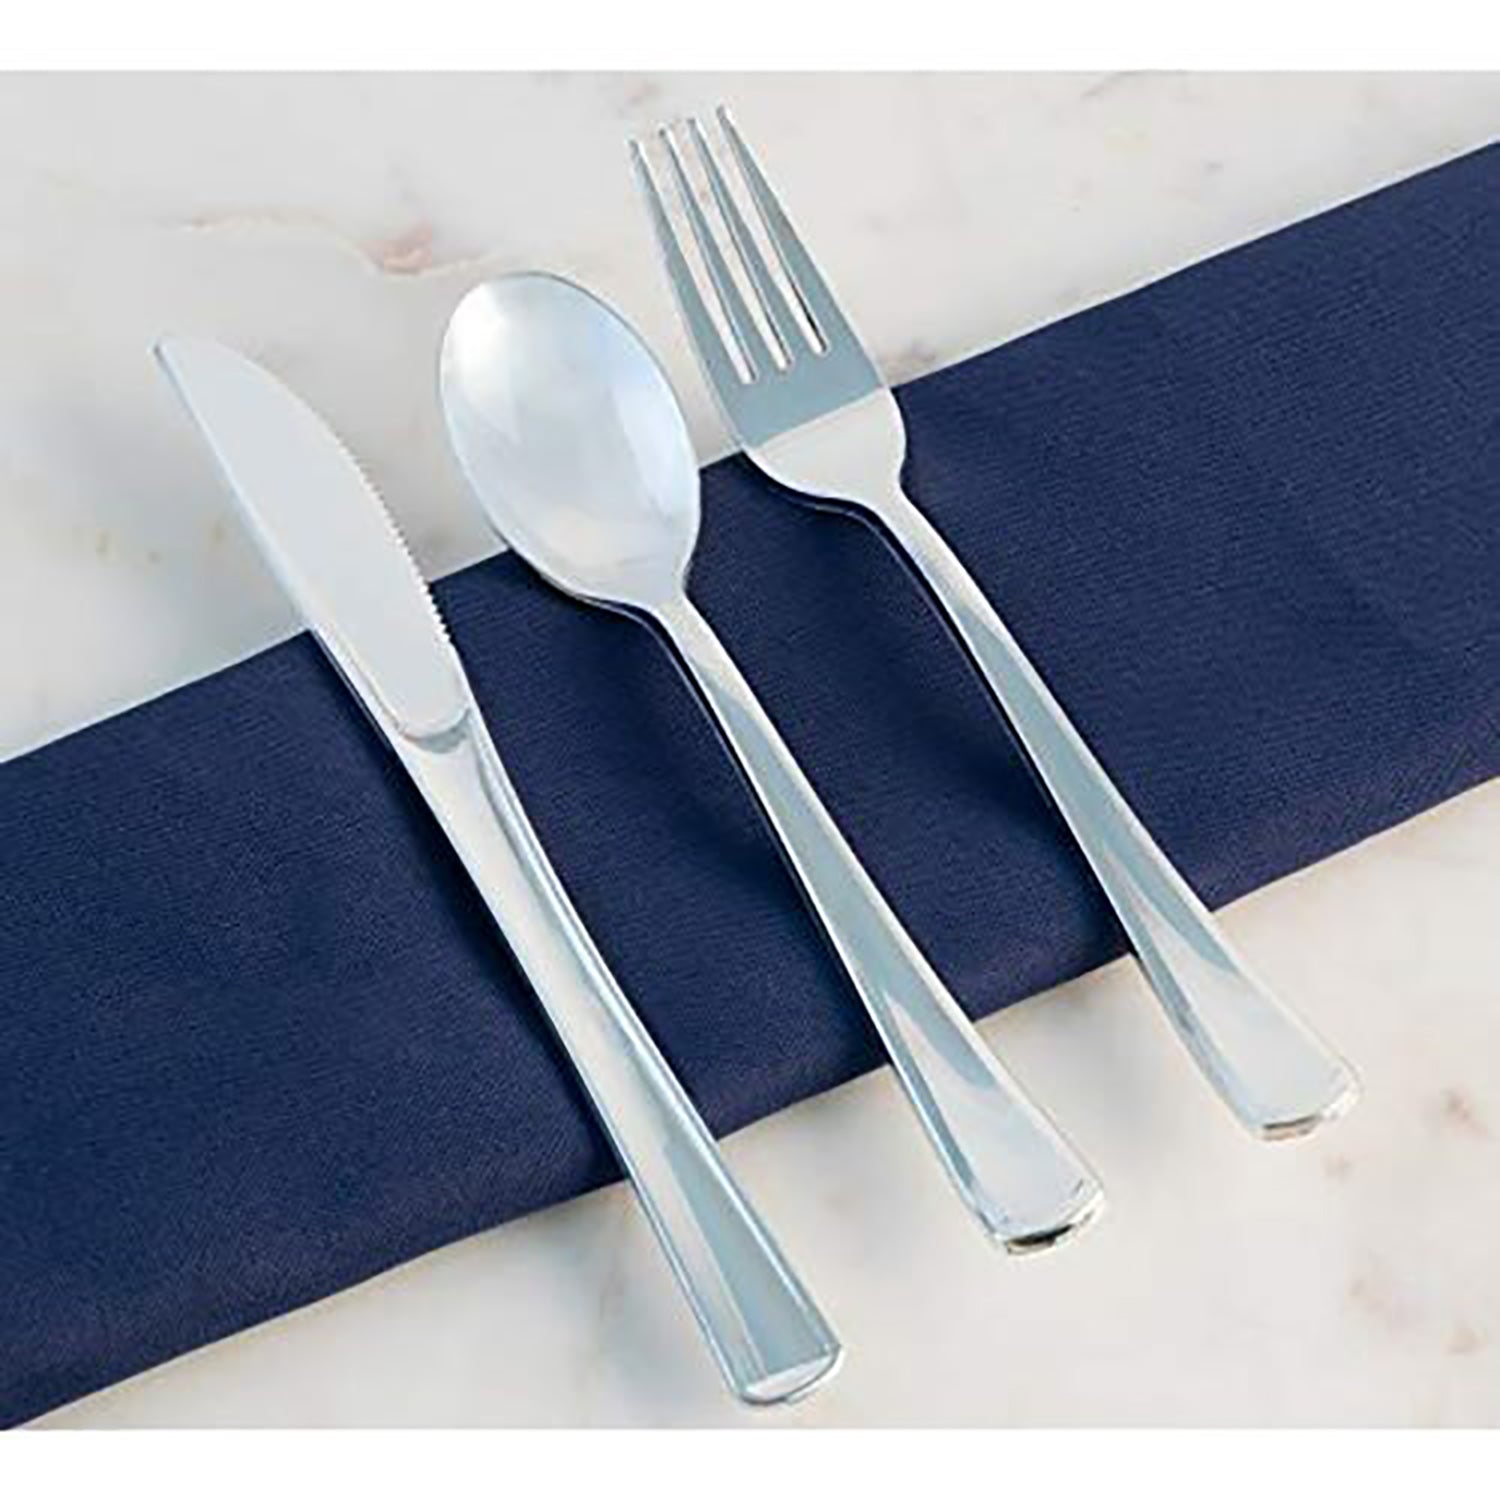 Dynasty Collection Plastic Silver Knives Tablesettings Blue Sky   